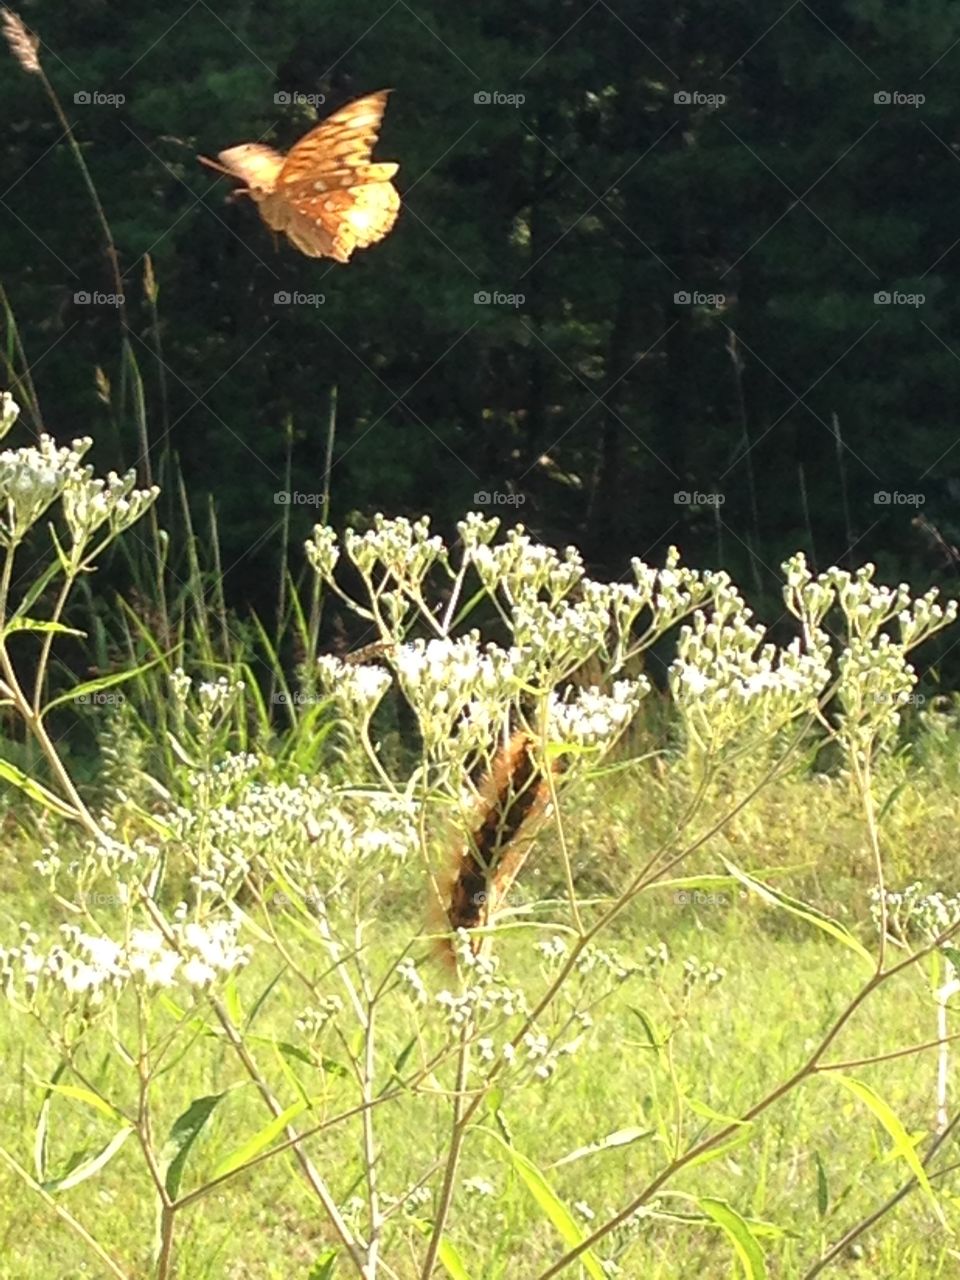 Butterfly and caterpillar